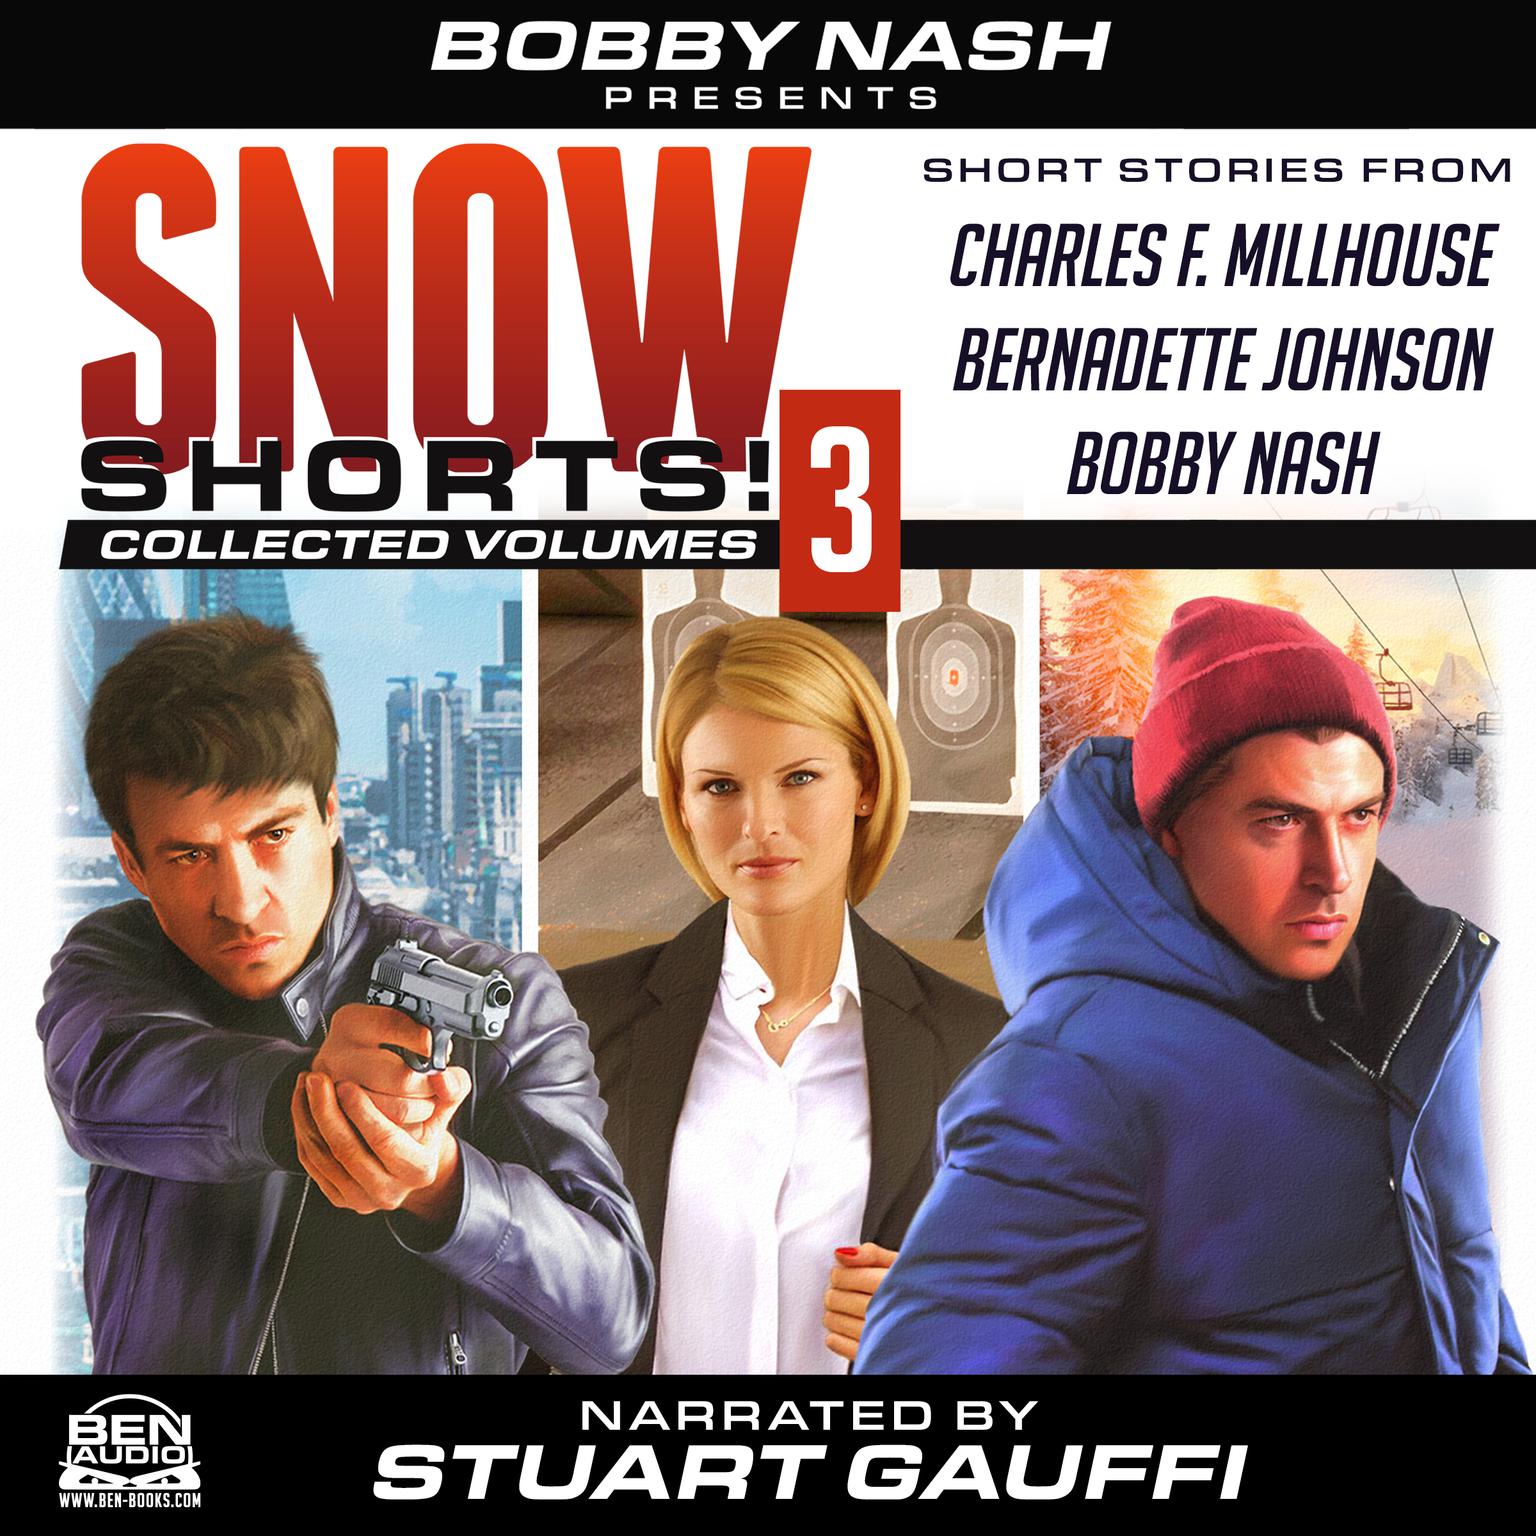 Snow Shorts, Vol. 3 Audiobook, by Charles F. Millhouse